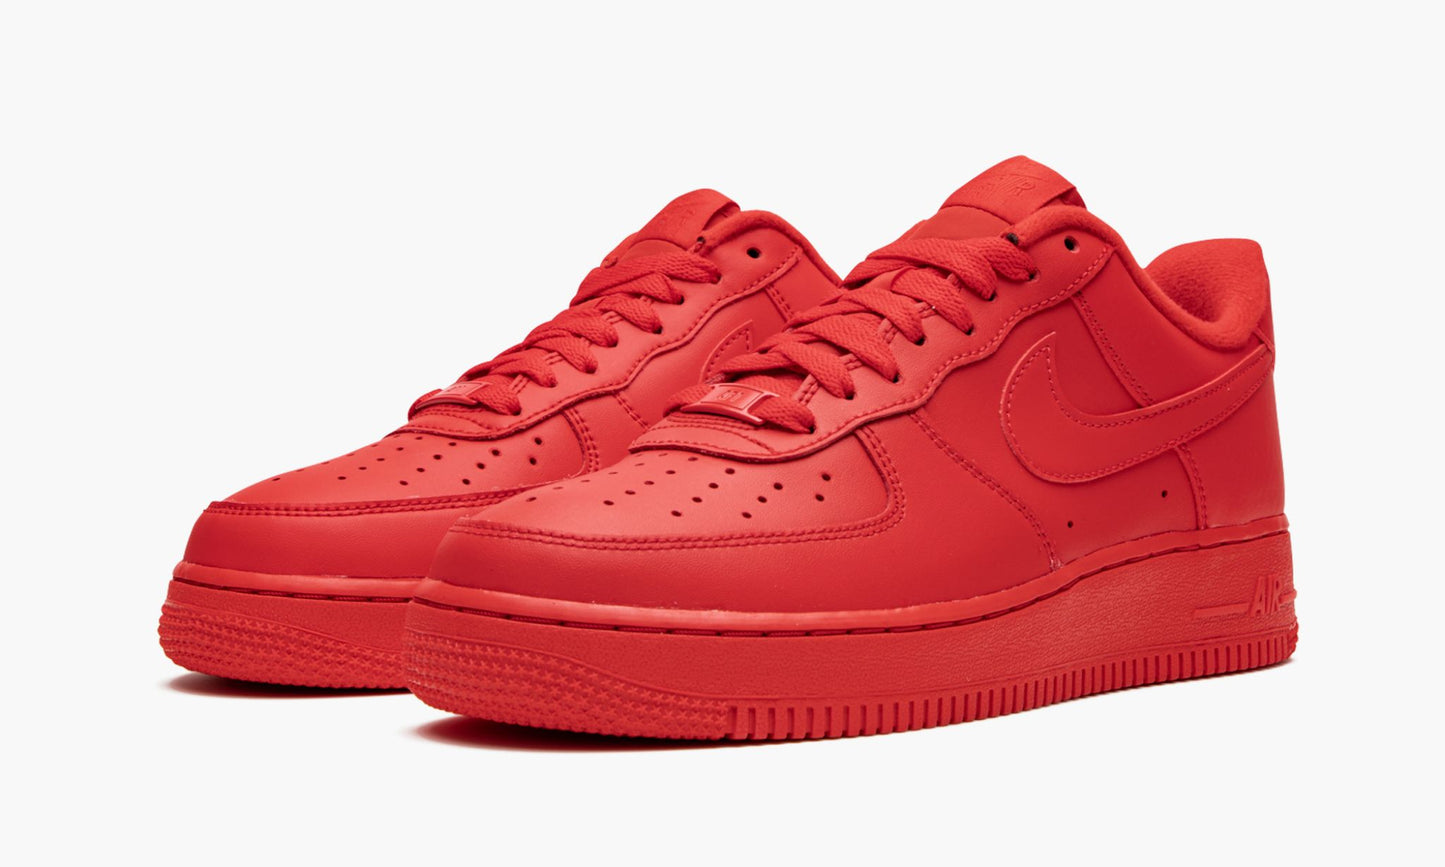 Air Force 1 '07 LV8 "Triple Red"